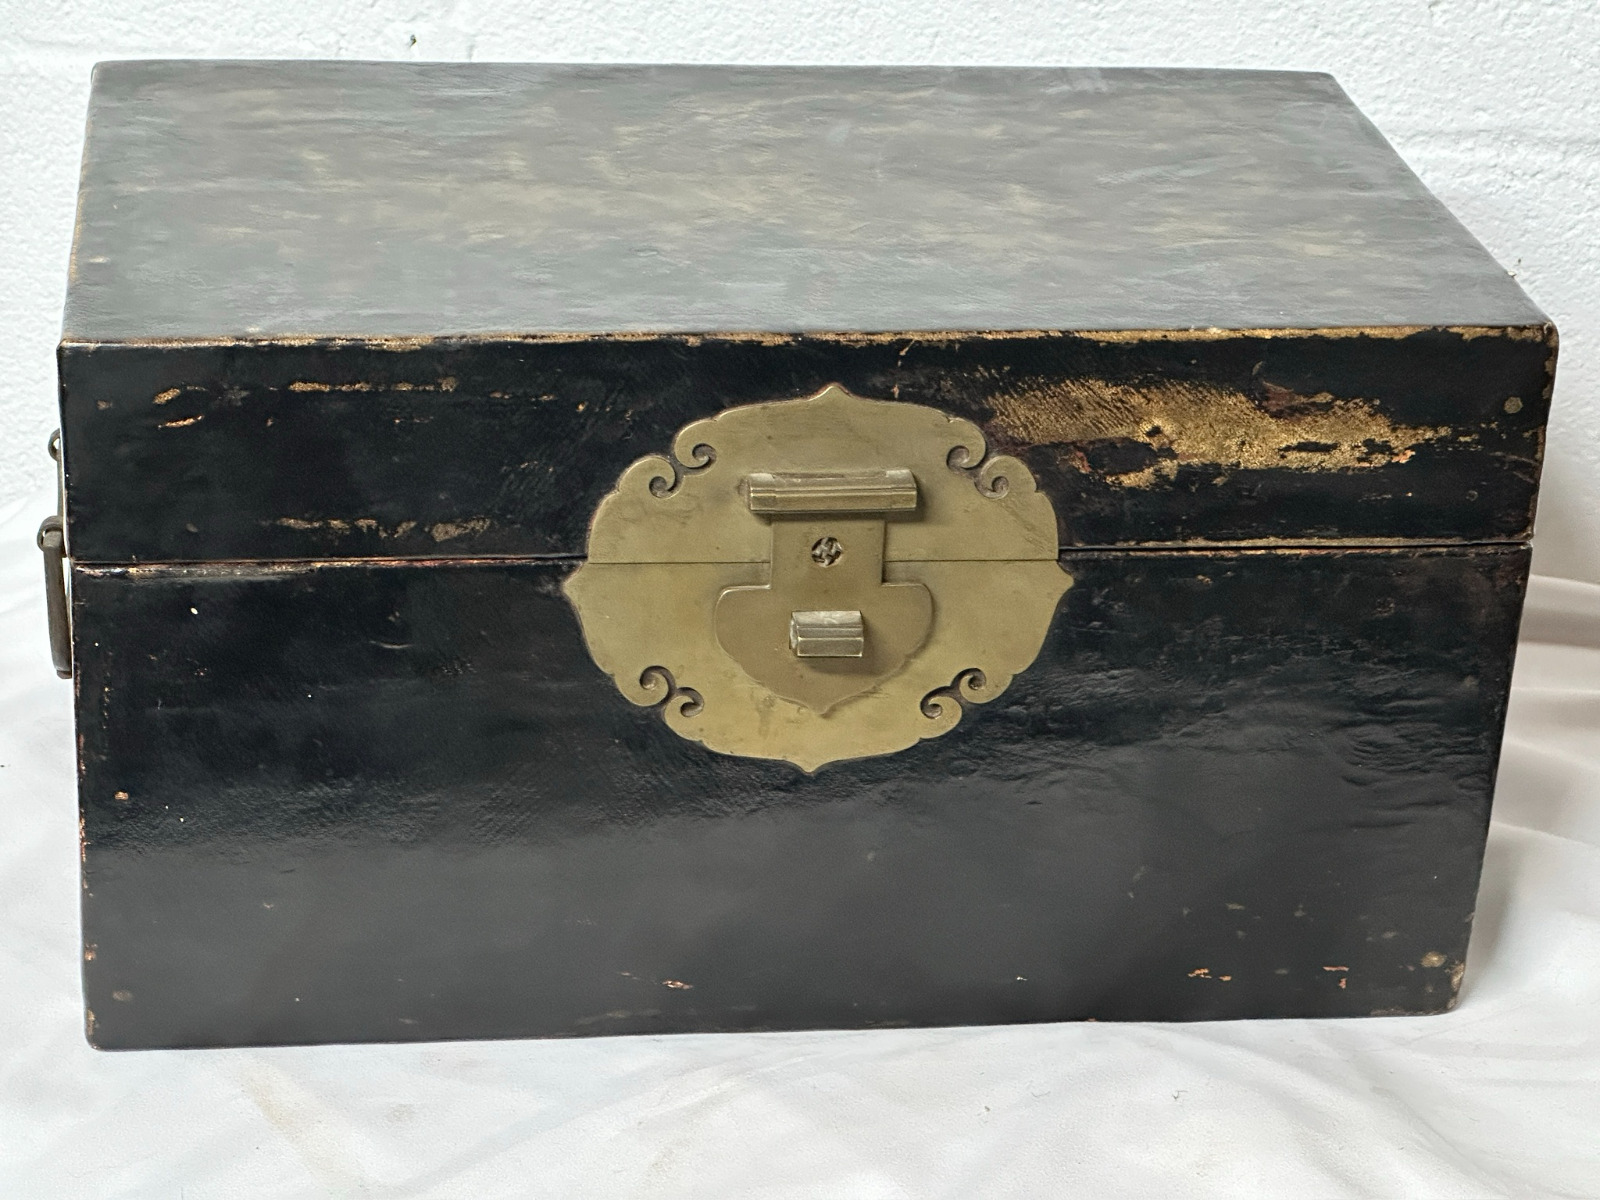 rare antique Chinese immigrant trunk box chest leather cover important history